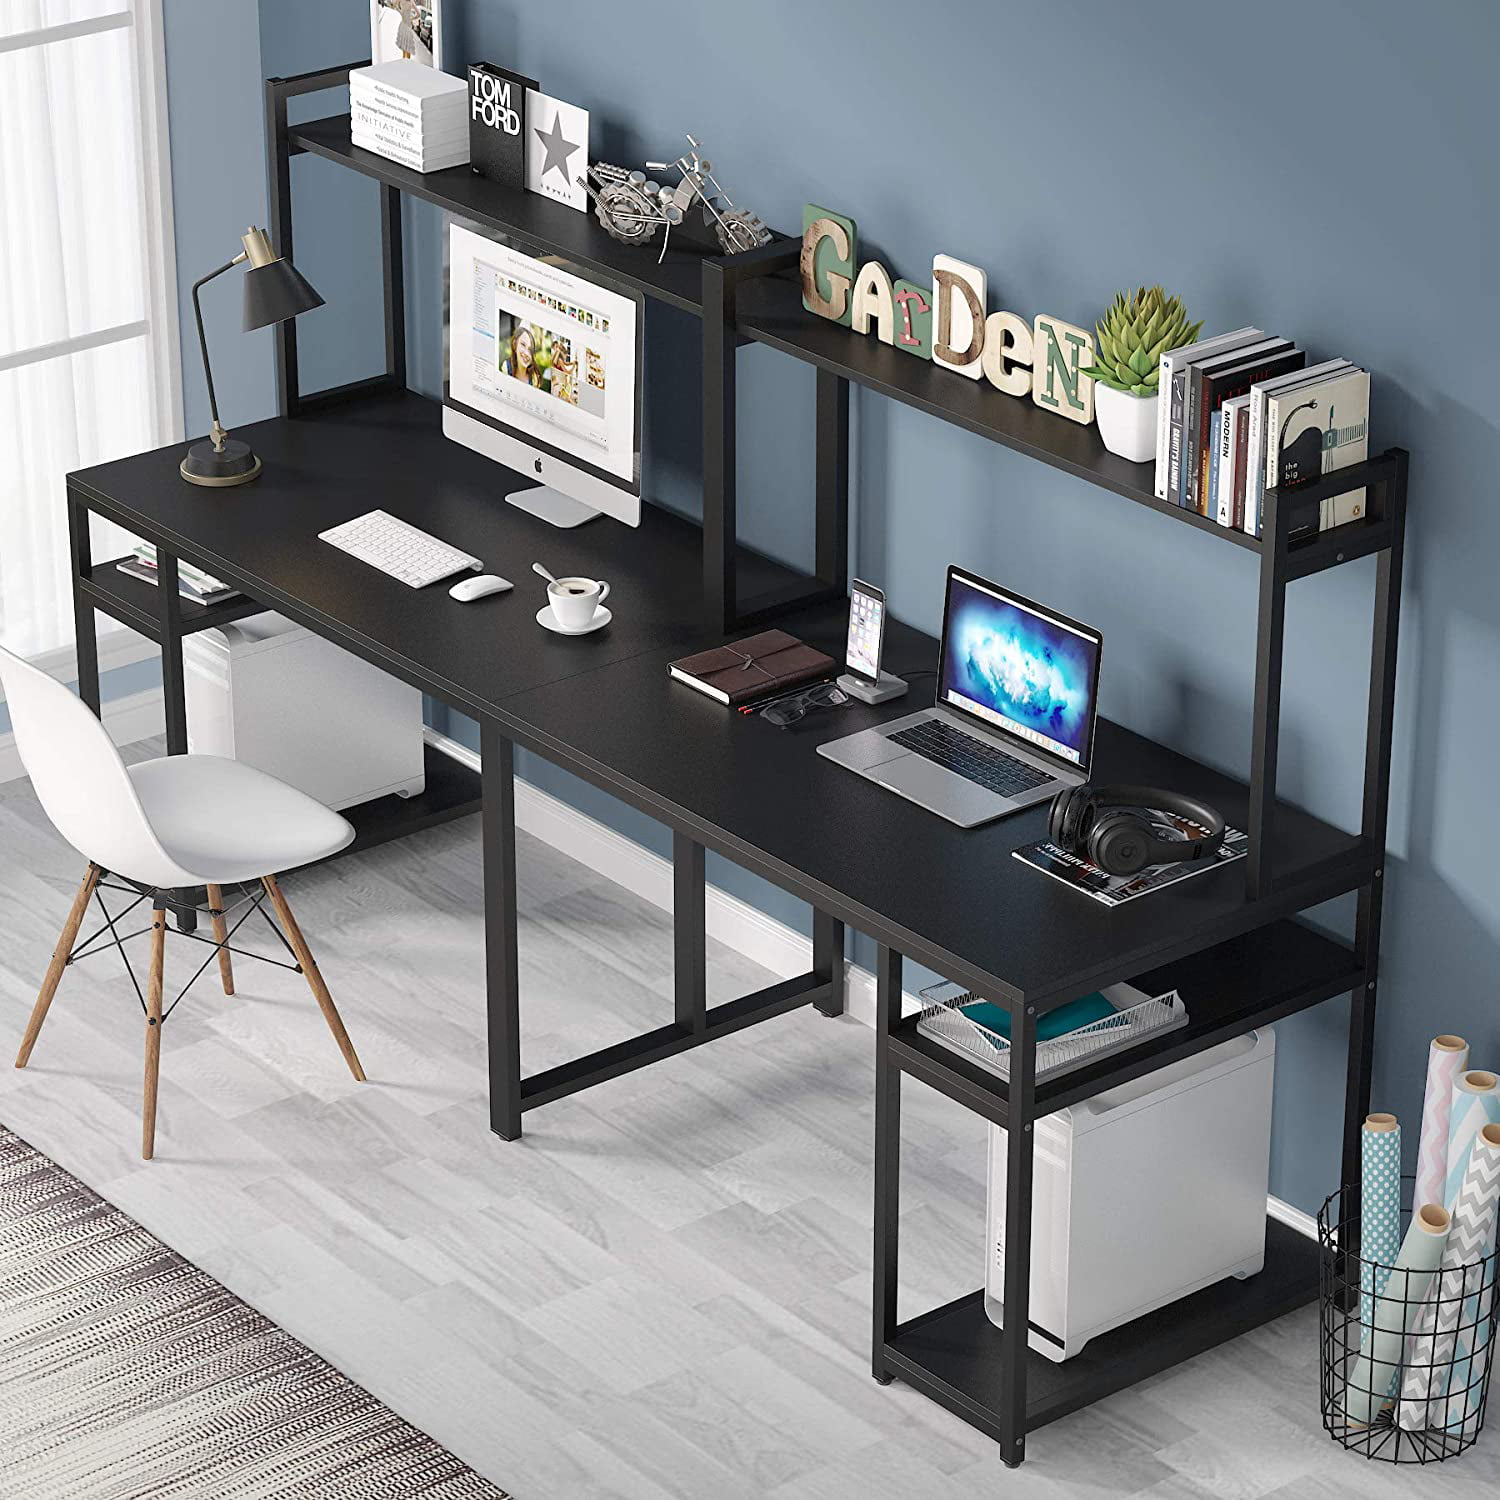 Tribesigns 94.5 inch Two Person Desk with Storage Shelves, Double Computer Office Desk with Splice Board, Extra Long Desk Study Writing Table.